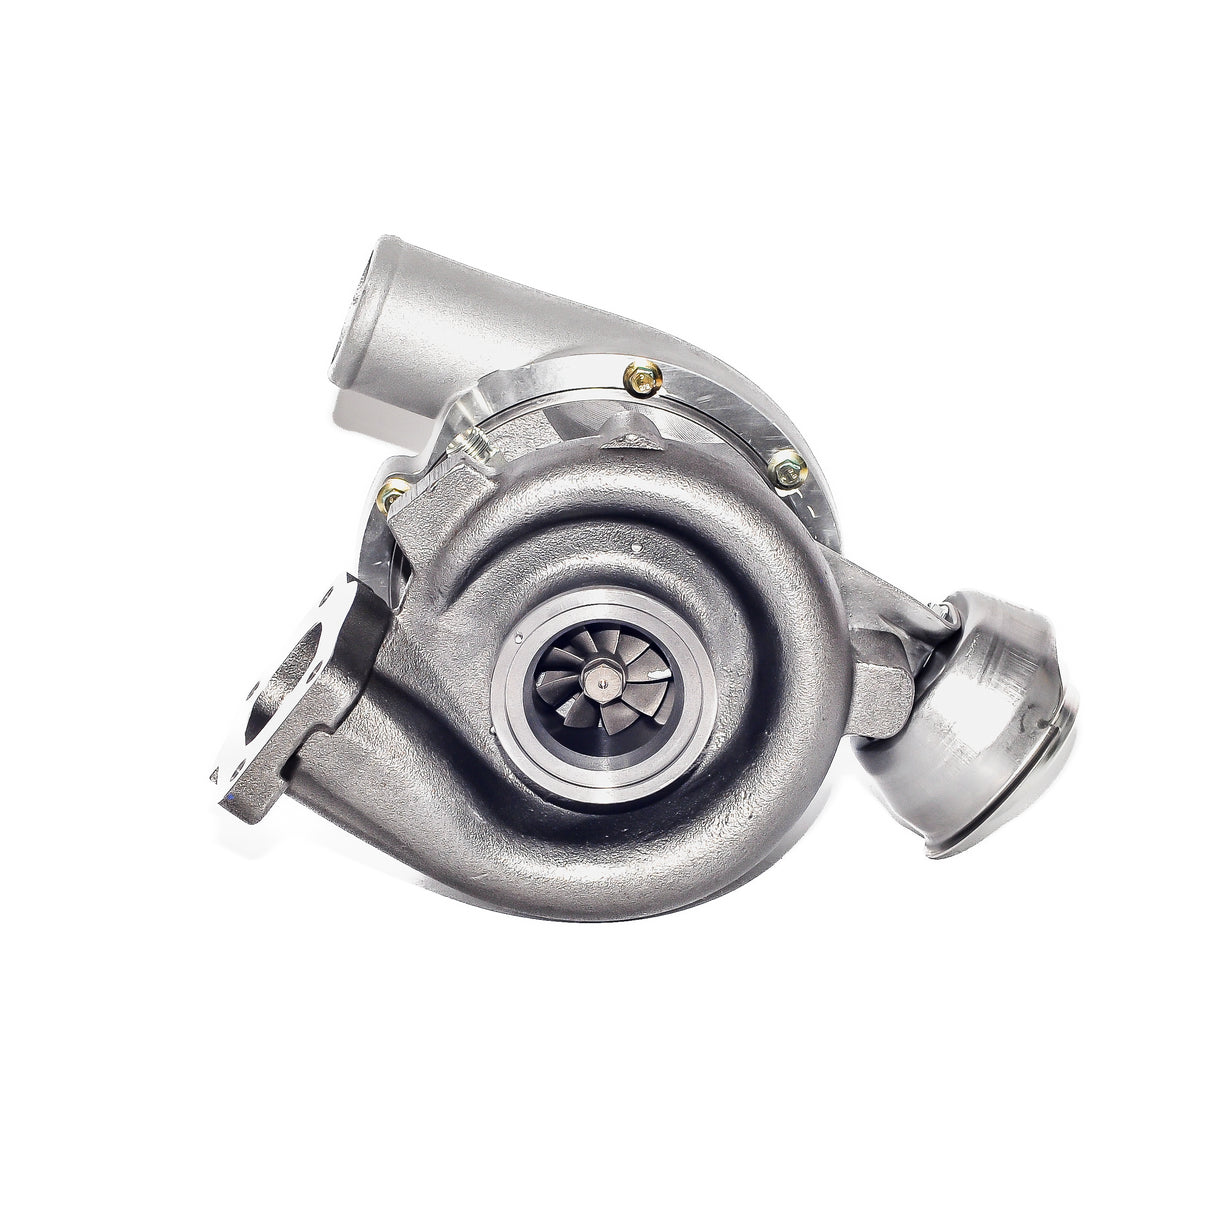 Iveco Daily turbo charger